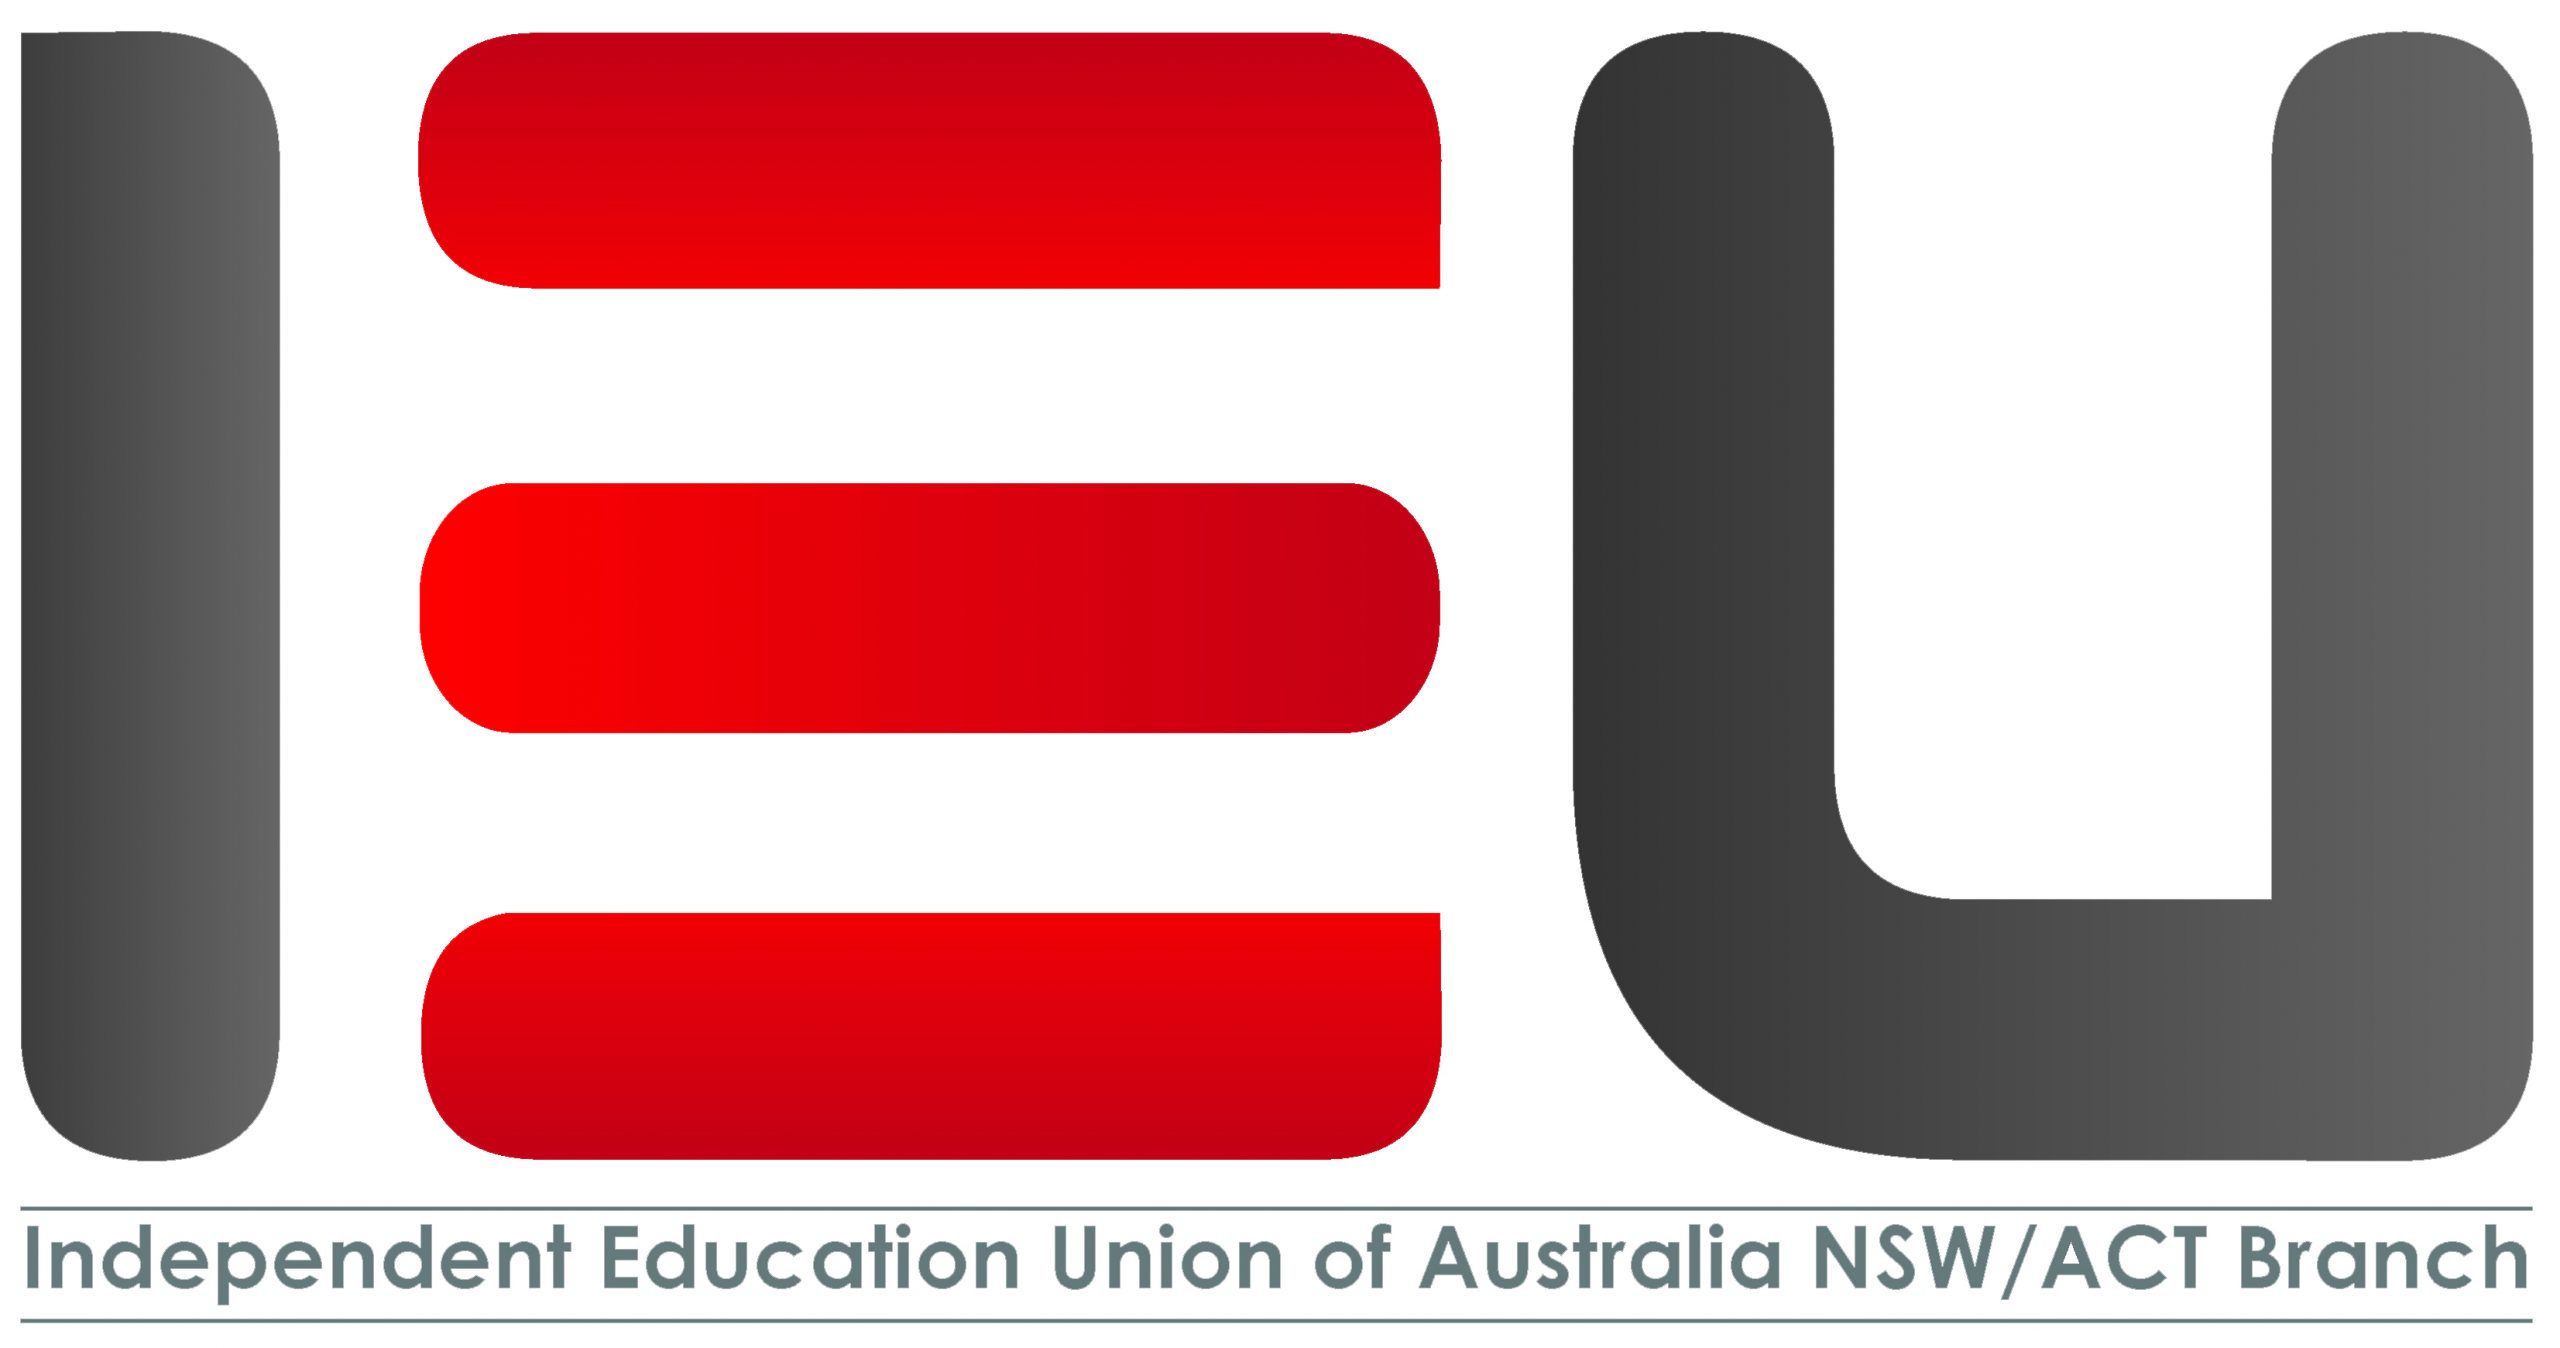 Independent Education Union of Australia NSW/ACT Branch